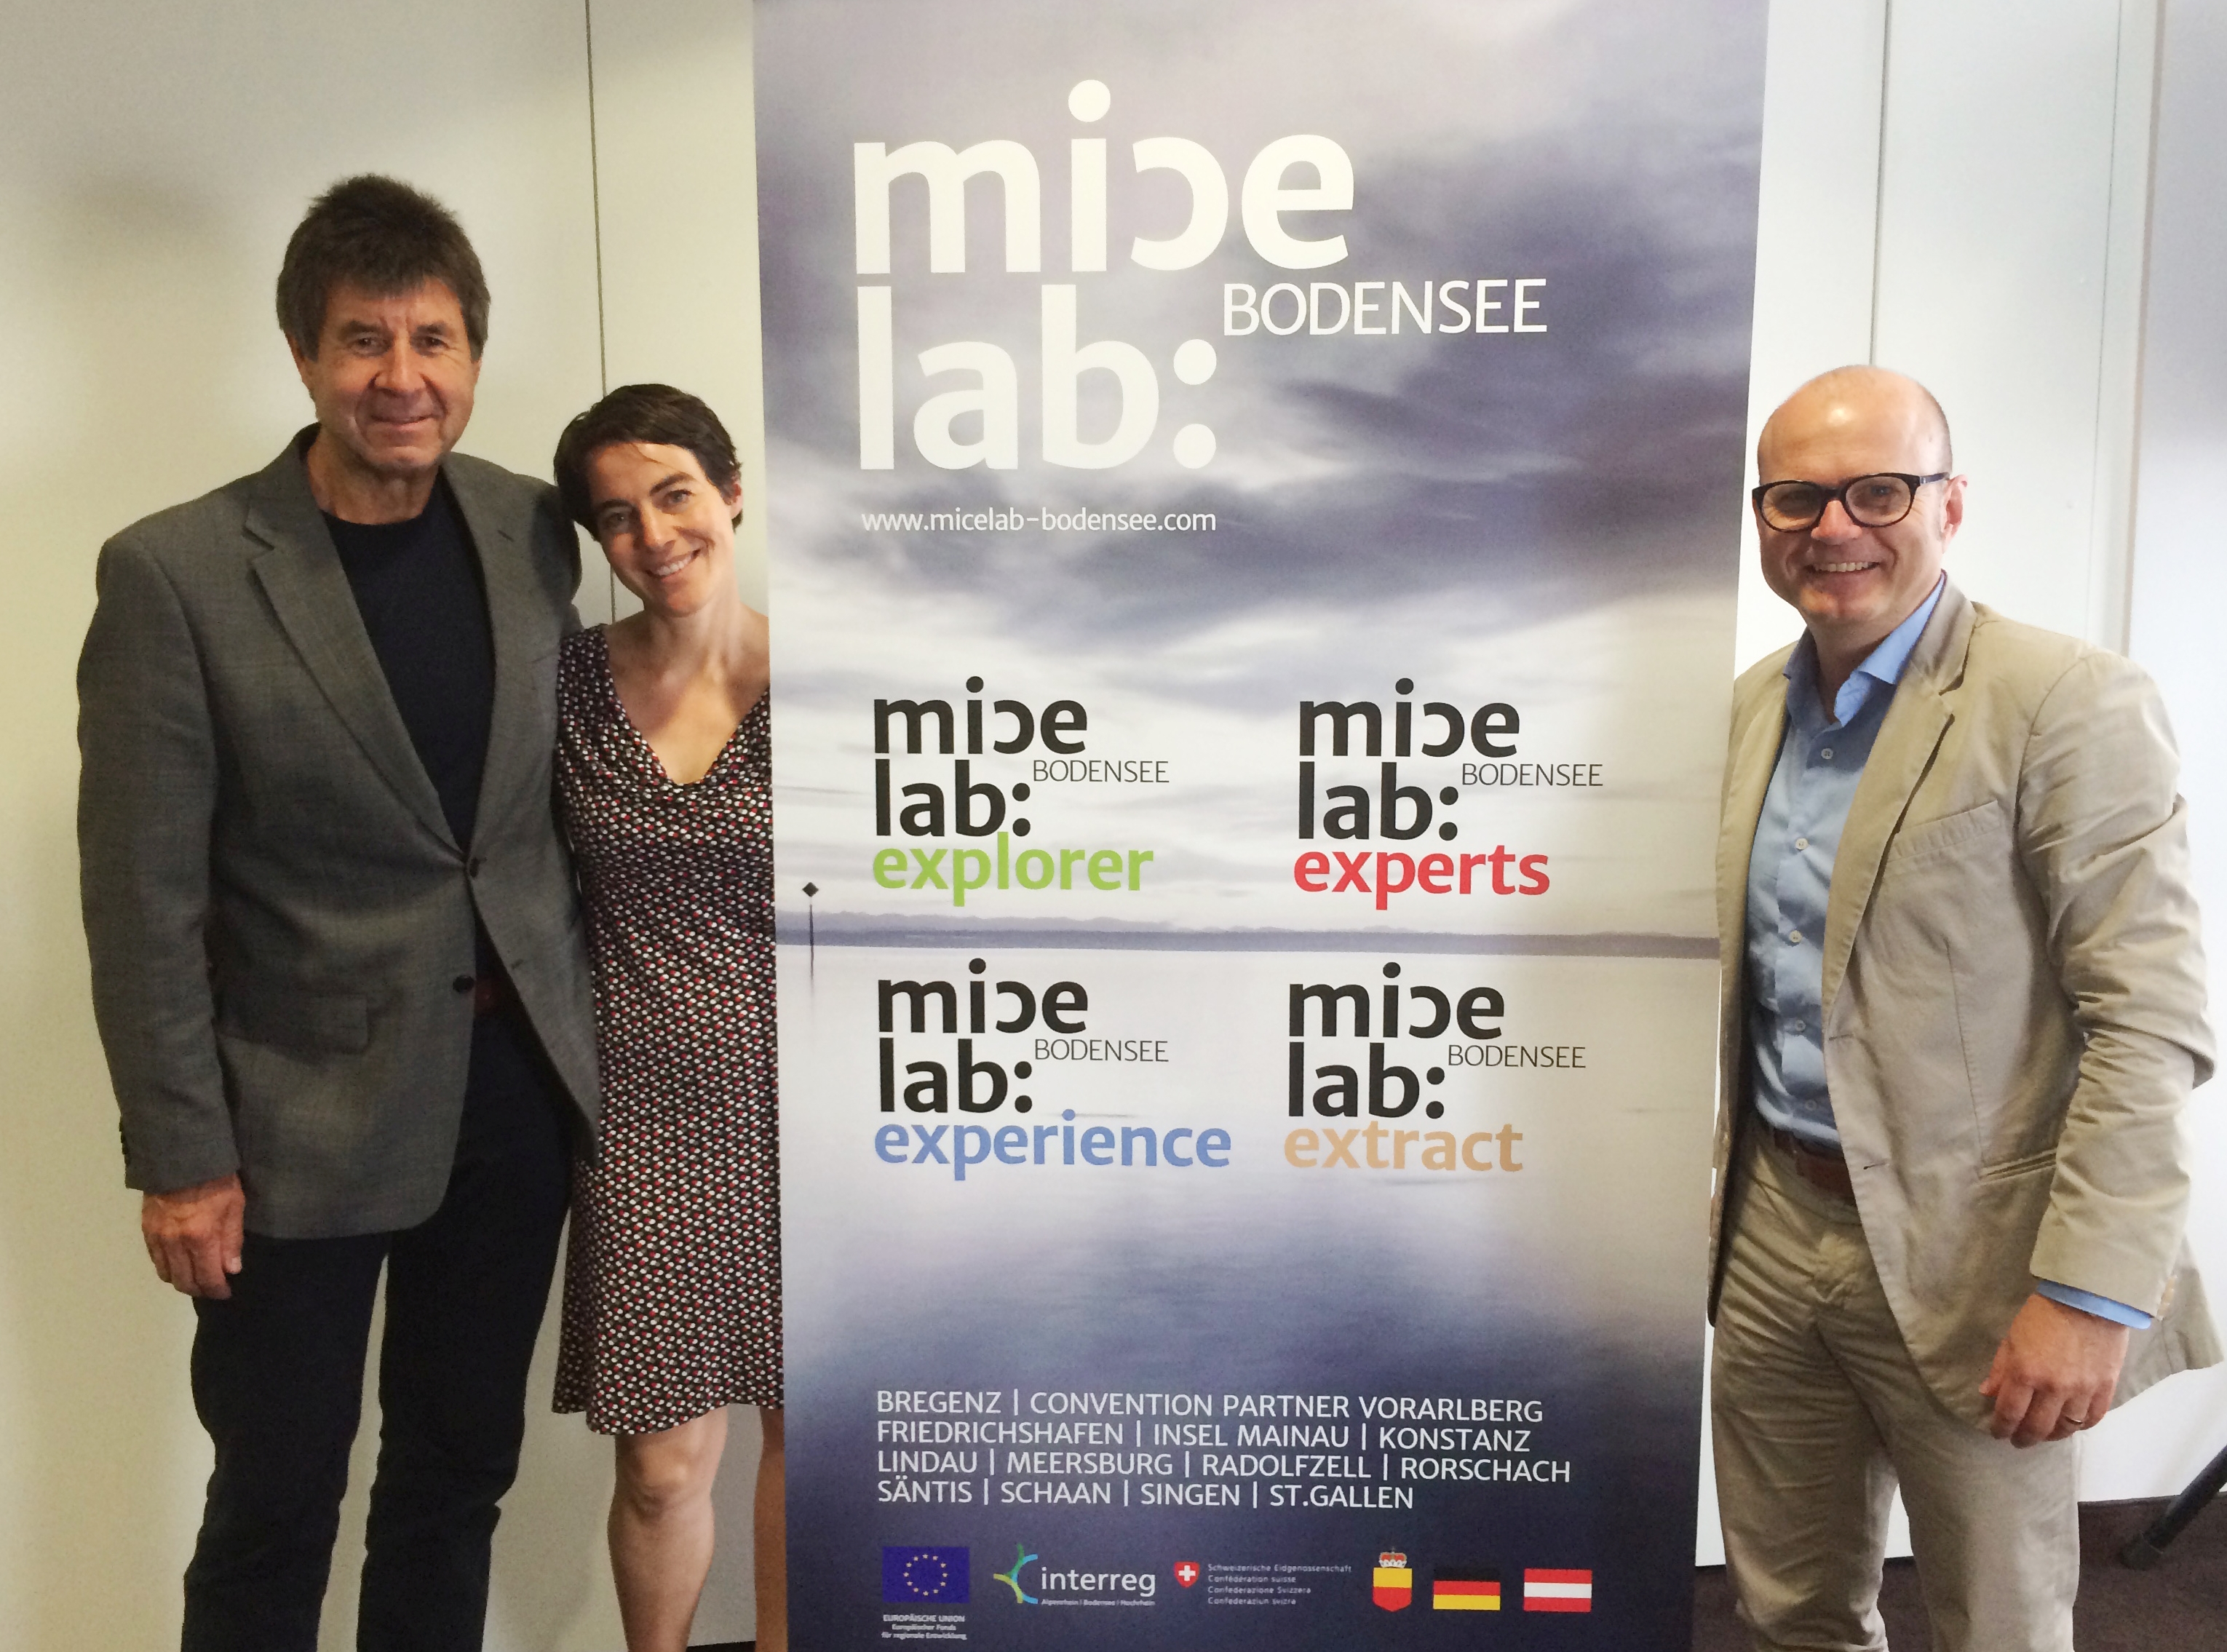 Introducing the training platform "micelab:bodensee"